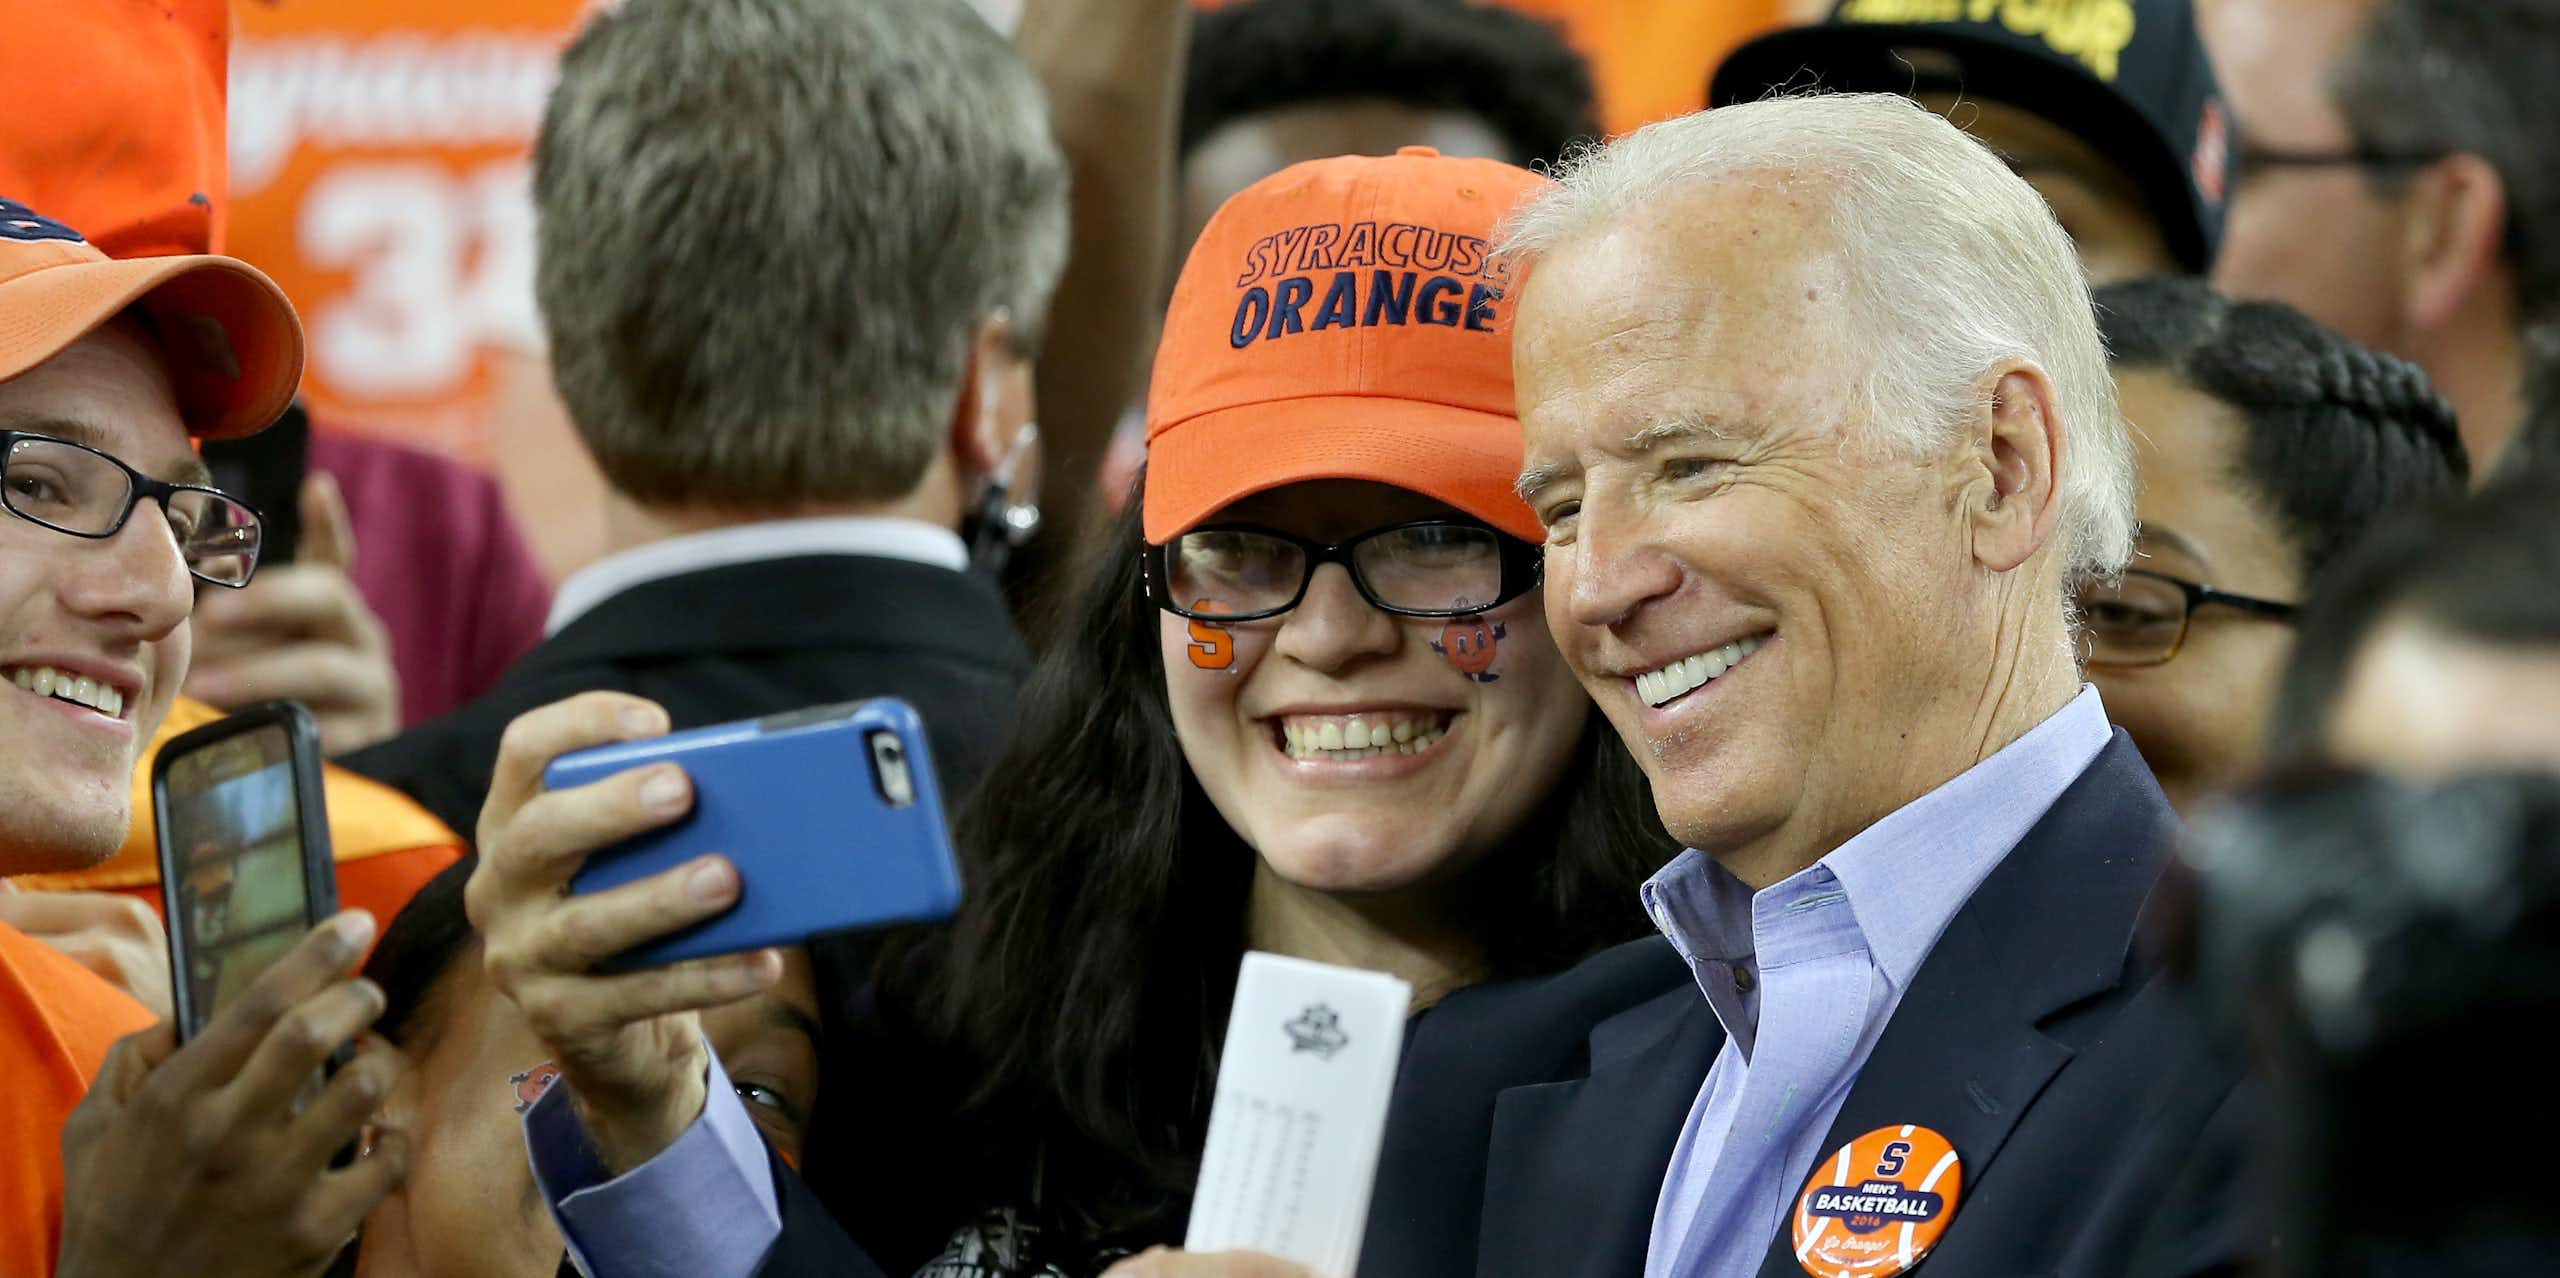 A gray haired man taking a selfie with a woman in an orange baseball cap.